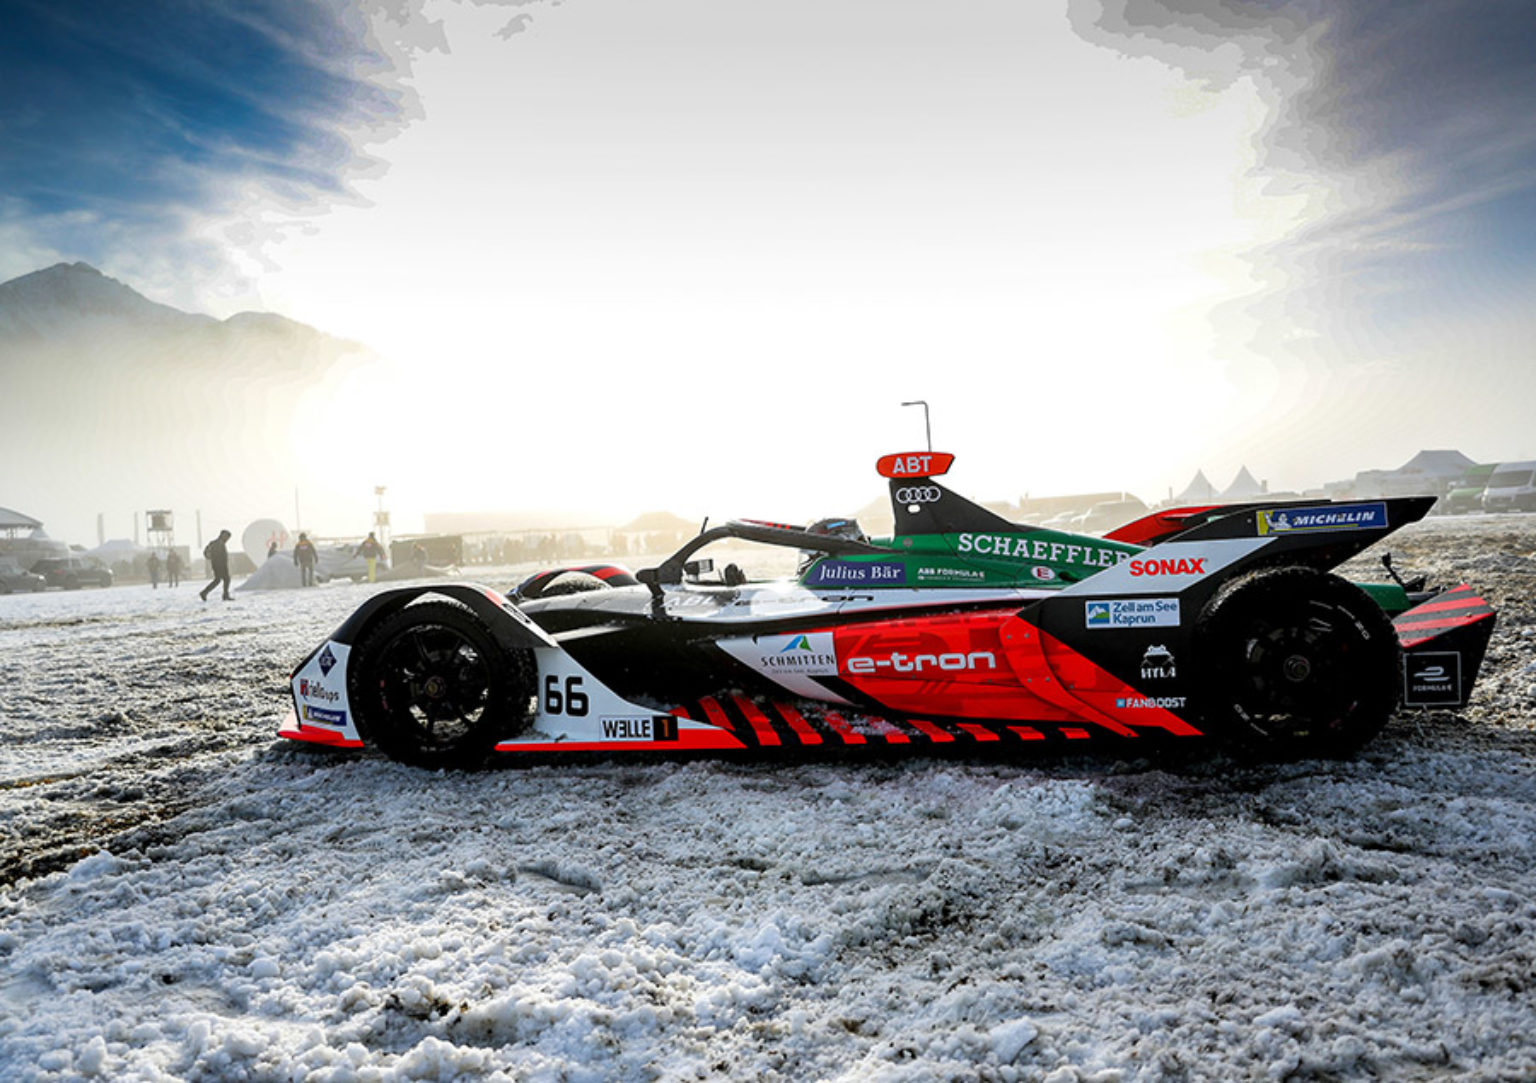 Audi Racing Drivers Show How It's Done in the Snow at GP Ice Race